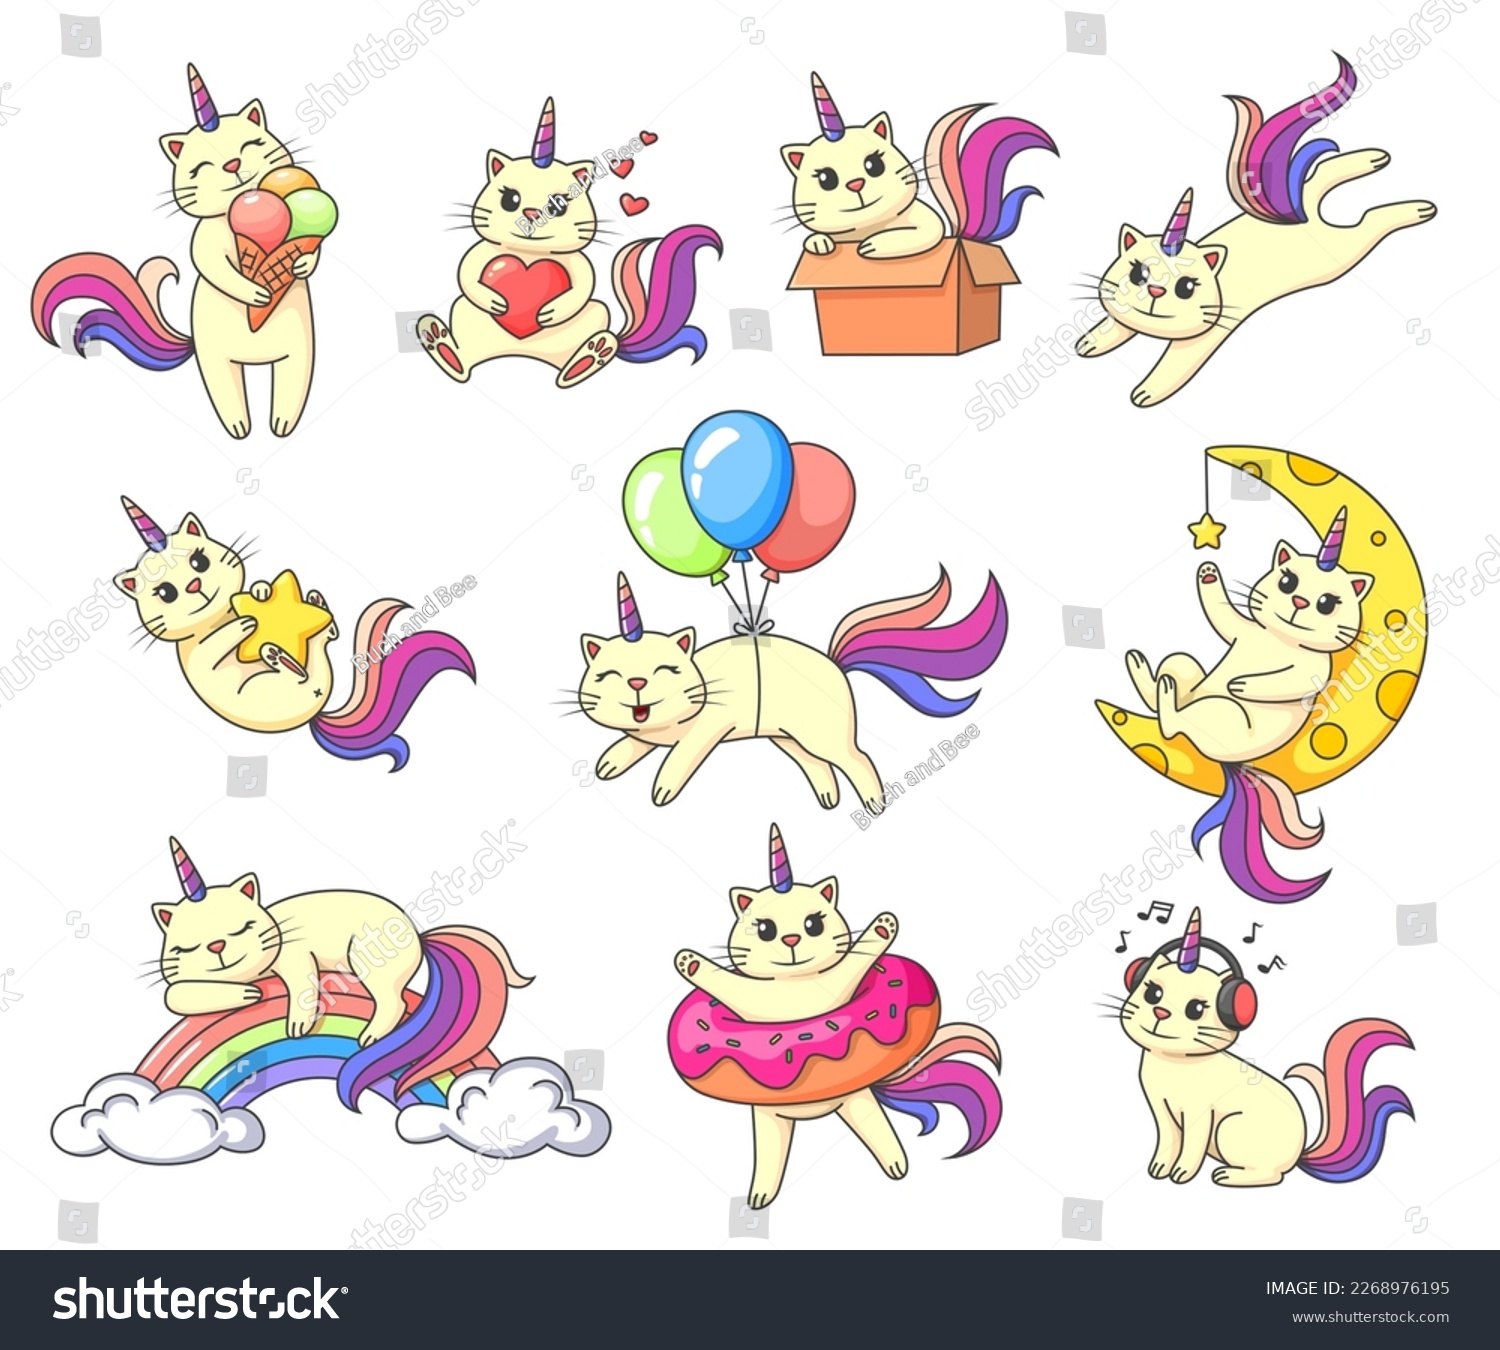 SVG of Cartoon cute caticorn characters isolated vector set. Fairytale personages eating ice cream, holding heart, playing with box, star, balloons and donut, sleeping on rainbow and listening to music svg